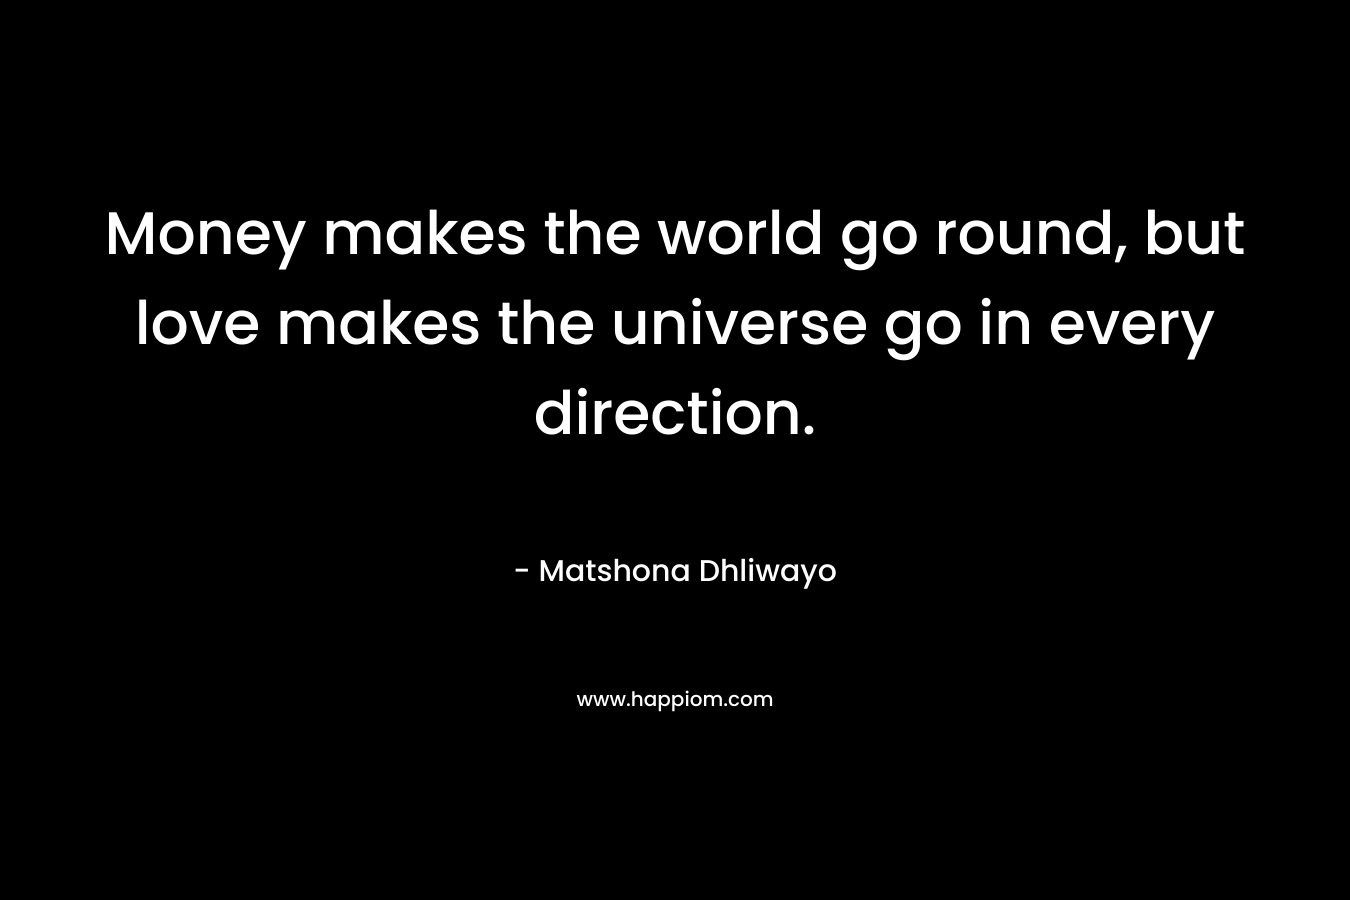 Money makes the world go round, but love makes the universe go in every direction.